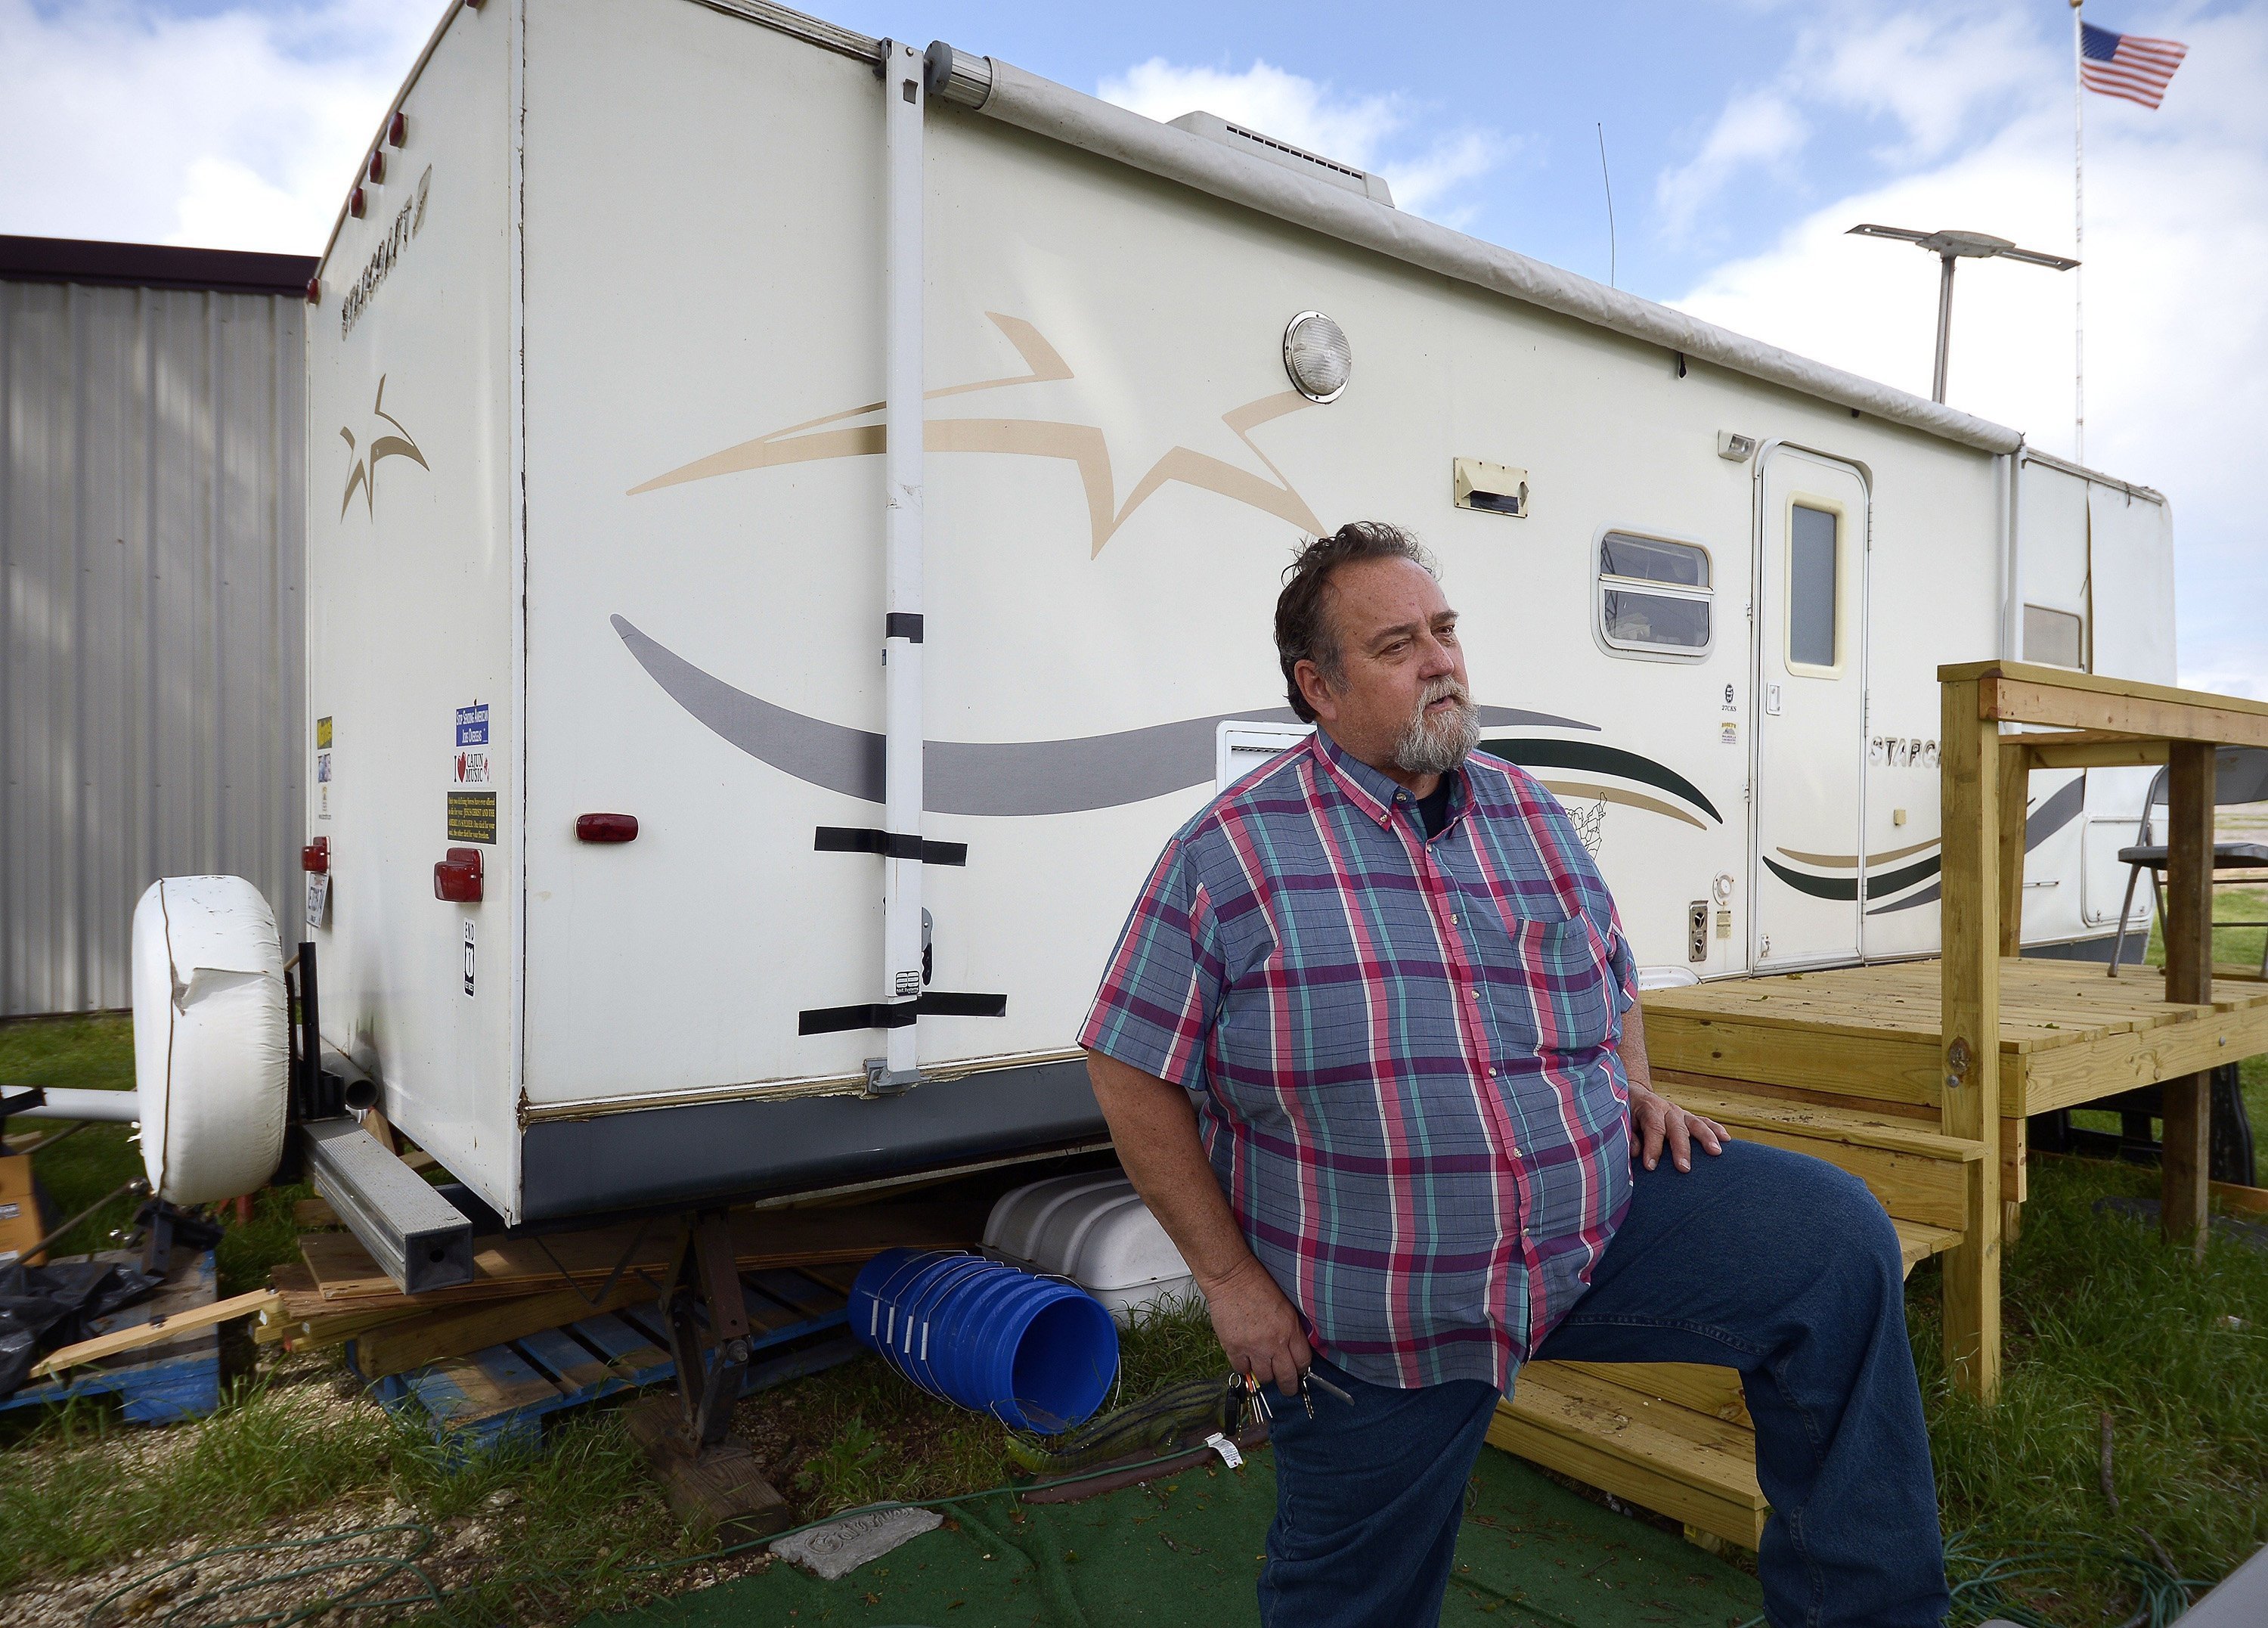 John Raimer stands in front of his trailer that he lives in as he leads at the West Long Term Recovery team in West, Texas, on April 1, 2014. (Max Faulkner—Fort Worth Star-Telegram/MCT/SIPA USA)